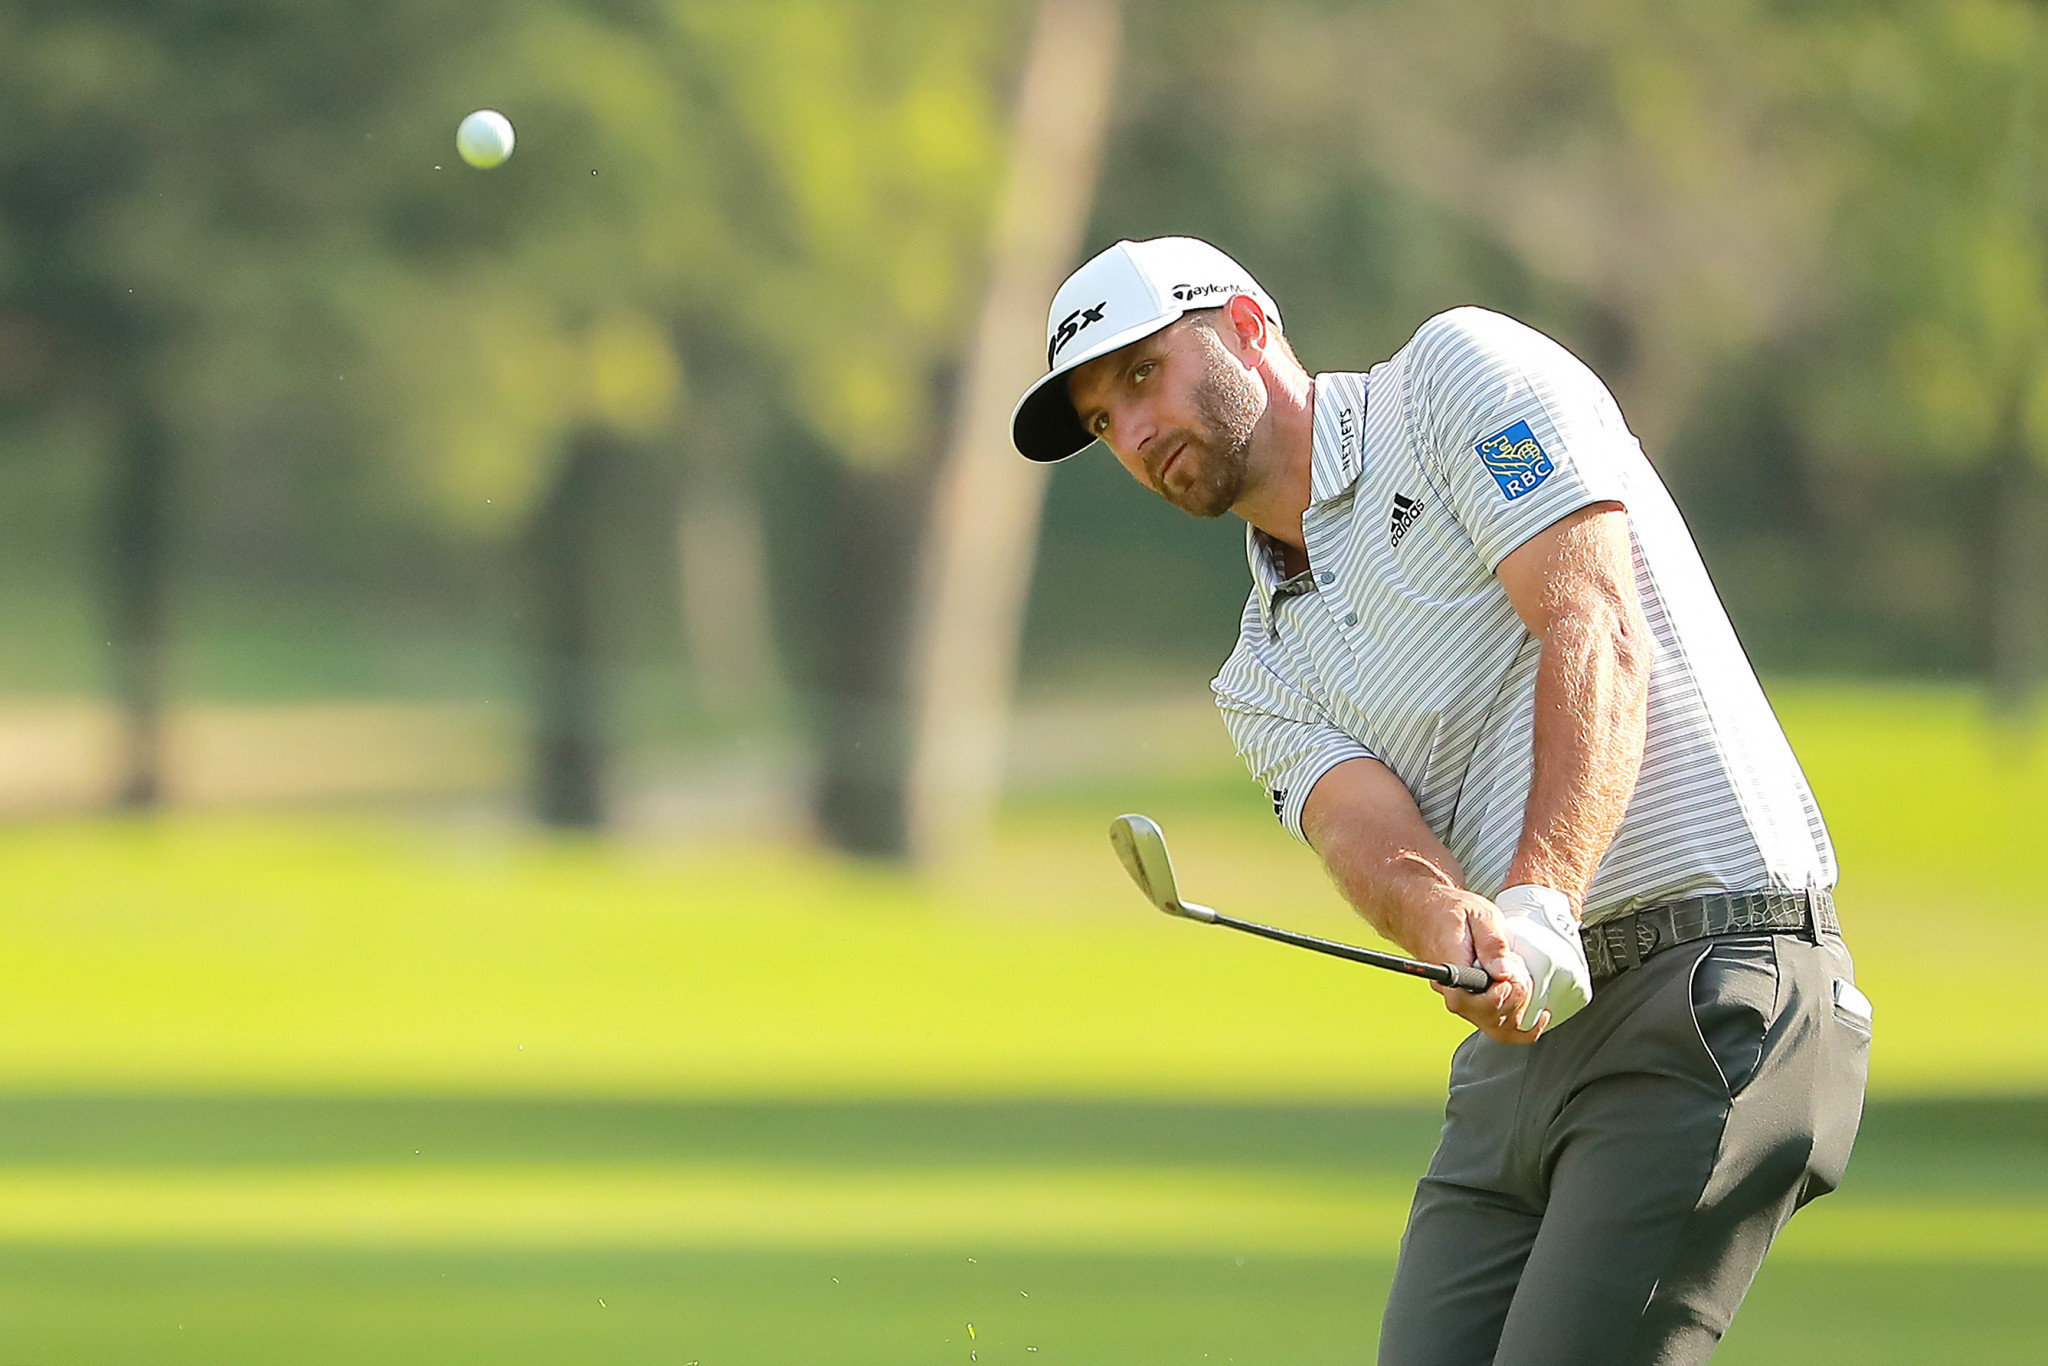 Johnson moves in front of McIlroy by four strokes at WGC-Mexico Championship